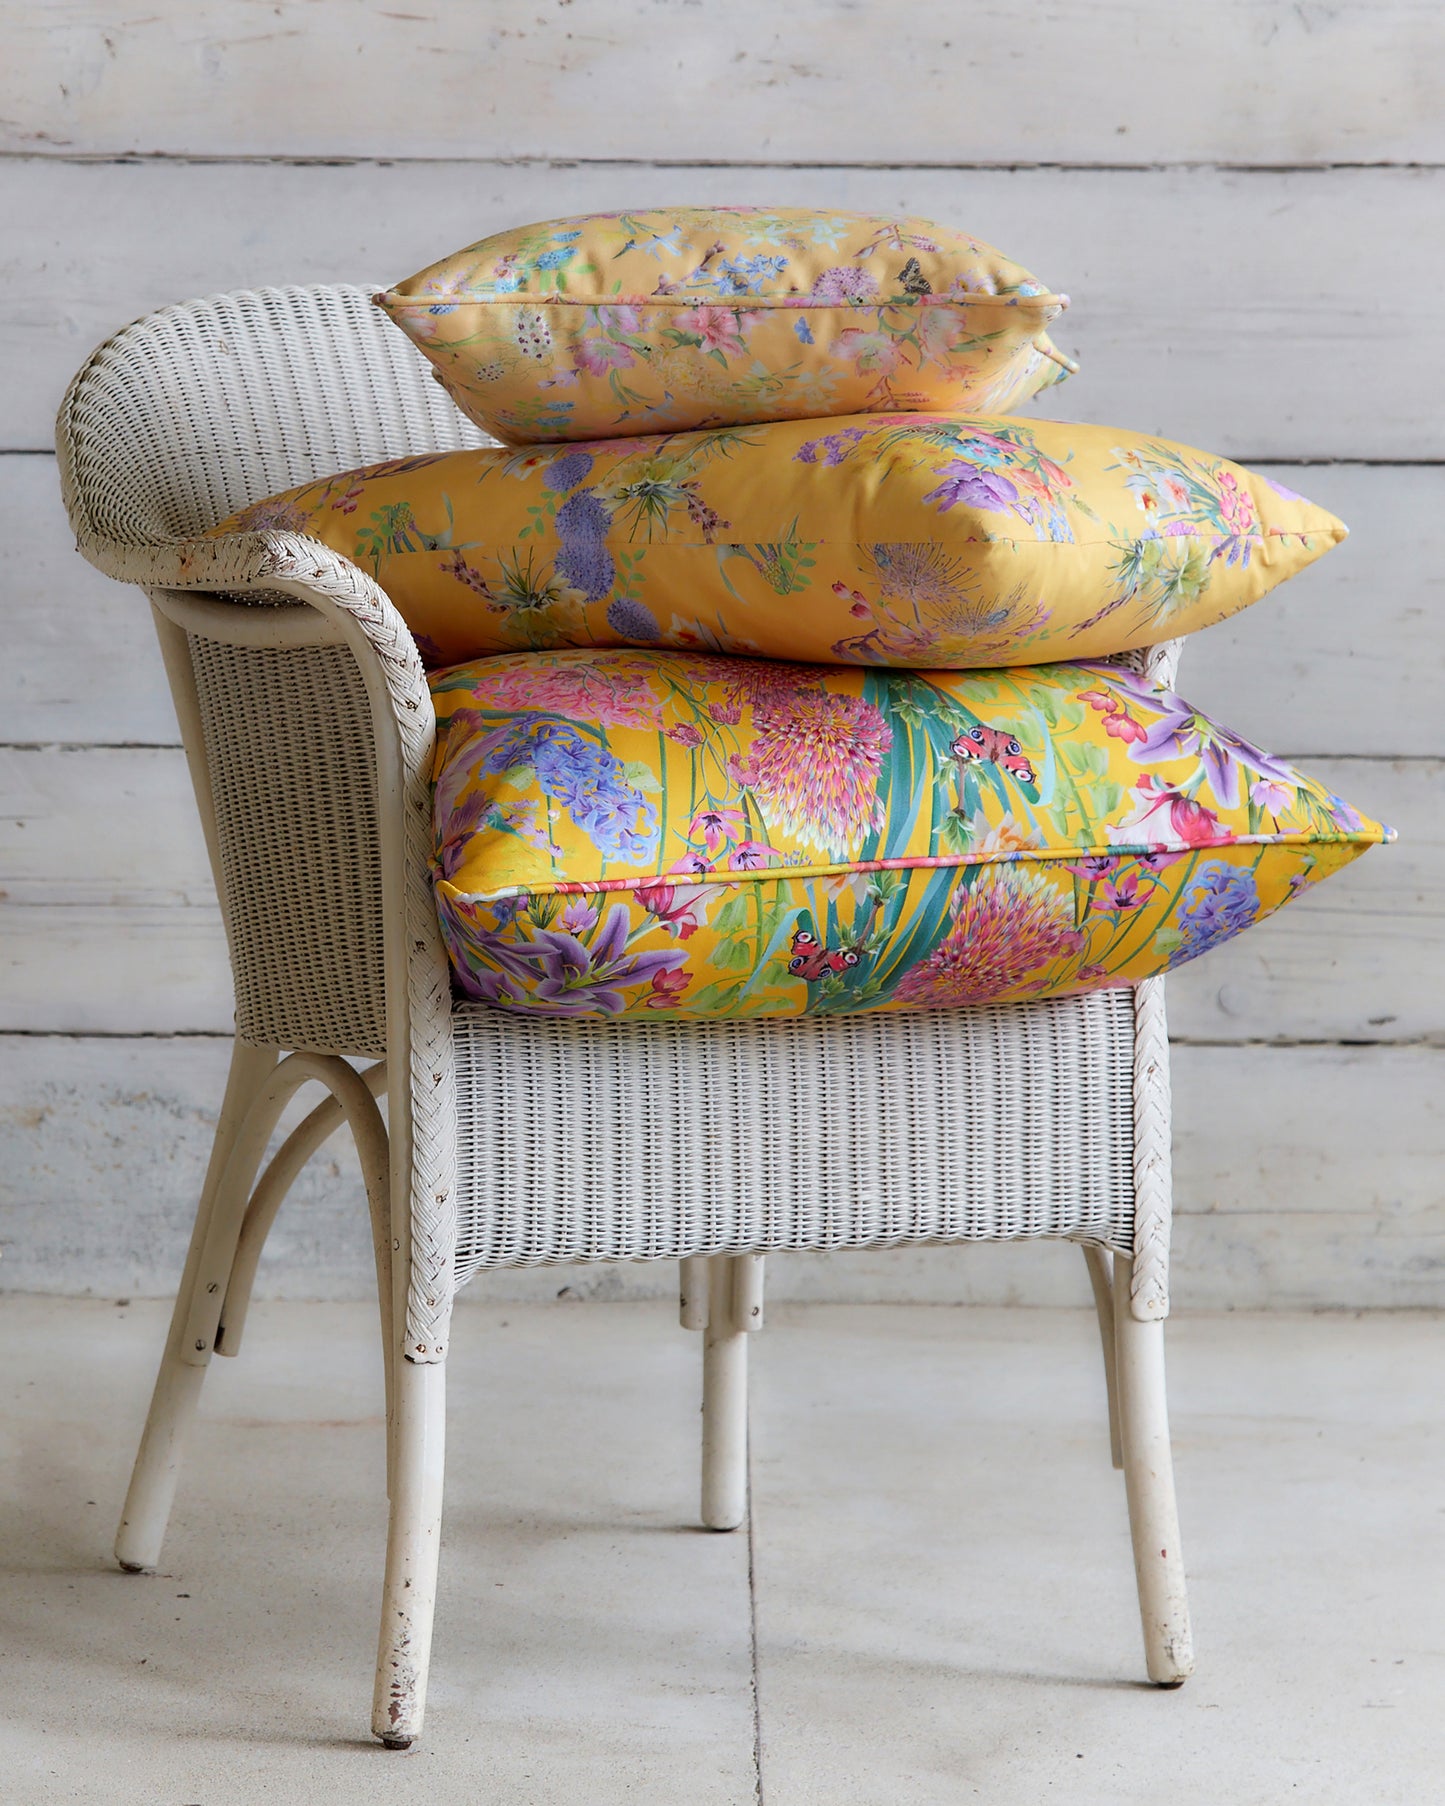 Bring happiness into your home with mustard yellow botanical floral patterns in organic cotton and hemp fabric cushions.